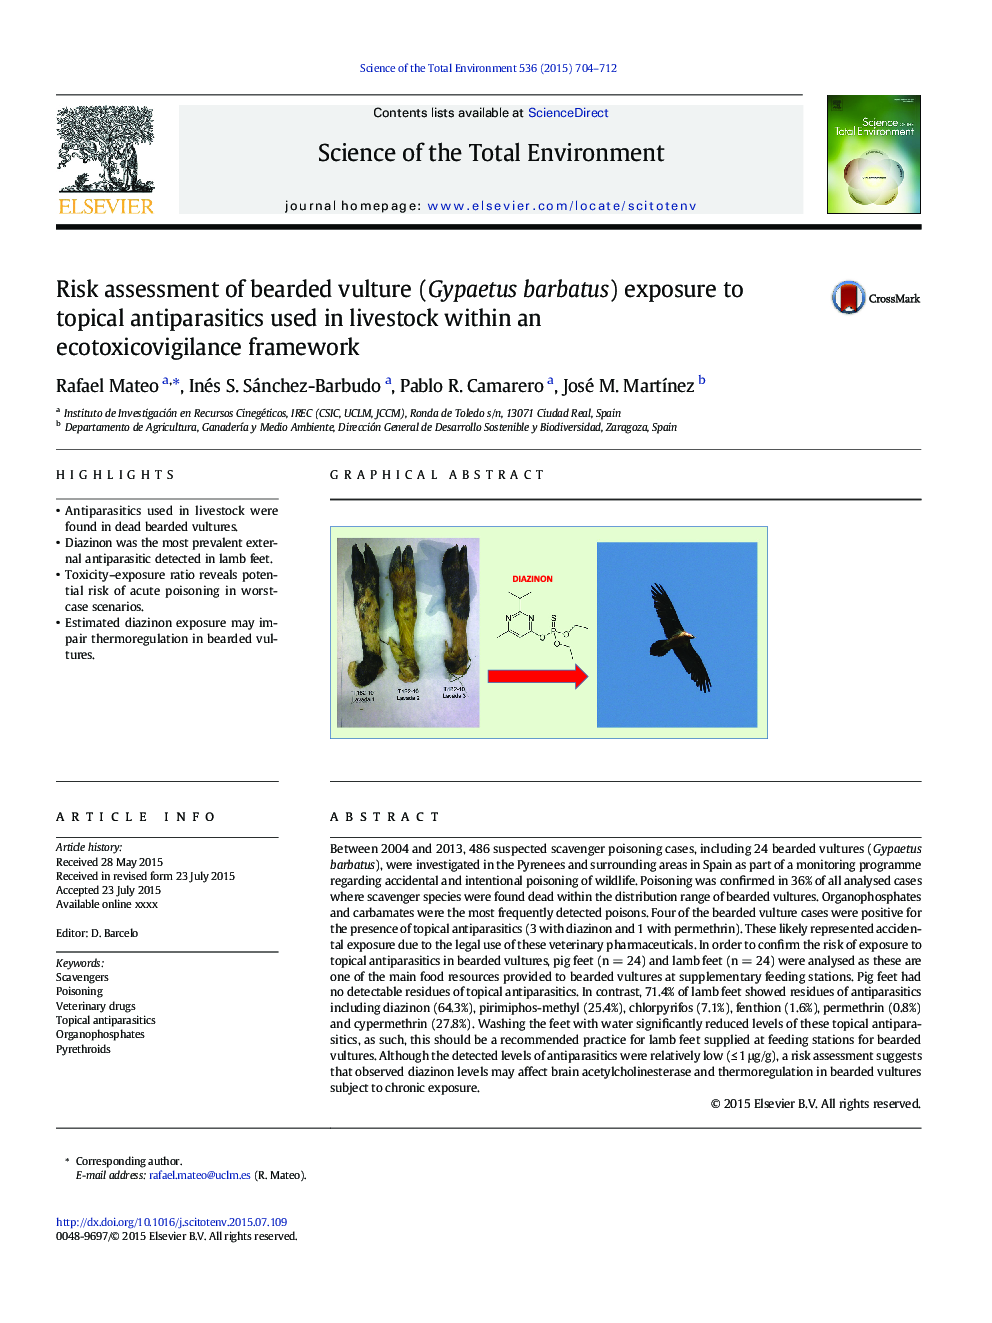 Risk assessment of bearded vulture (Gypaetus barbatus) exposure to topical antiparasitics used in livestock within an ecotoxicovigilance framework